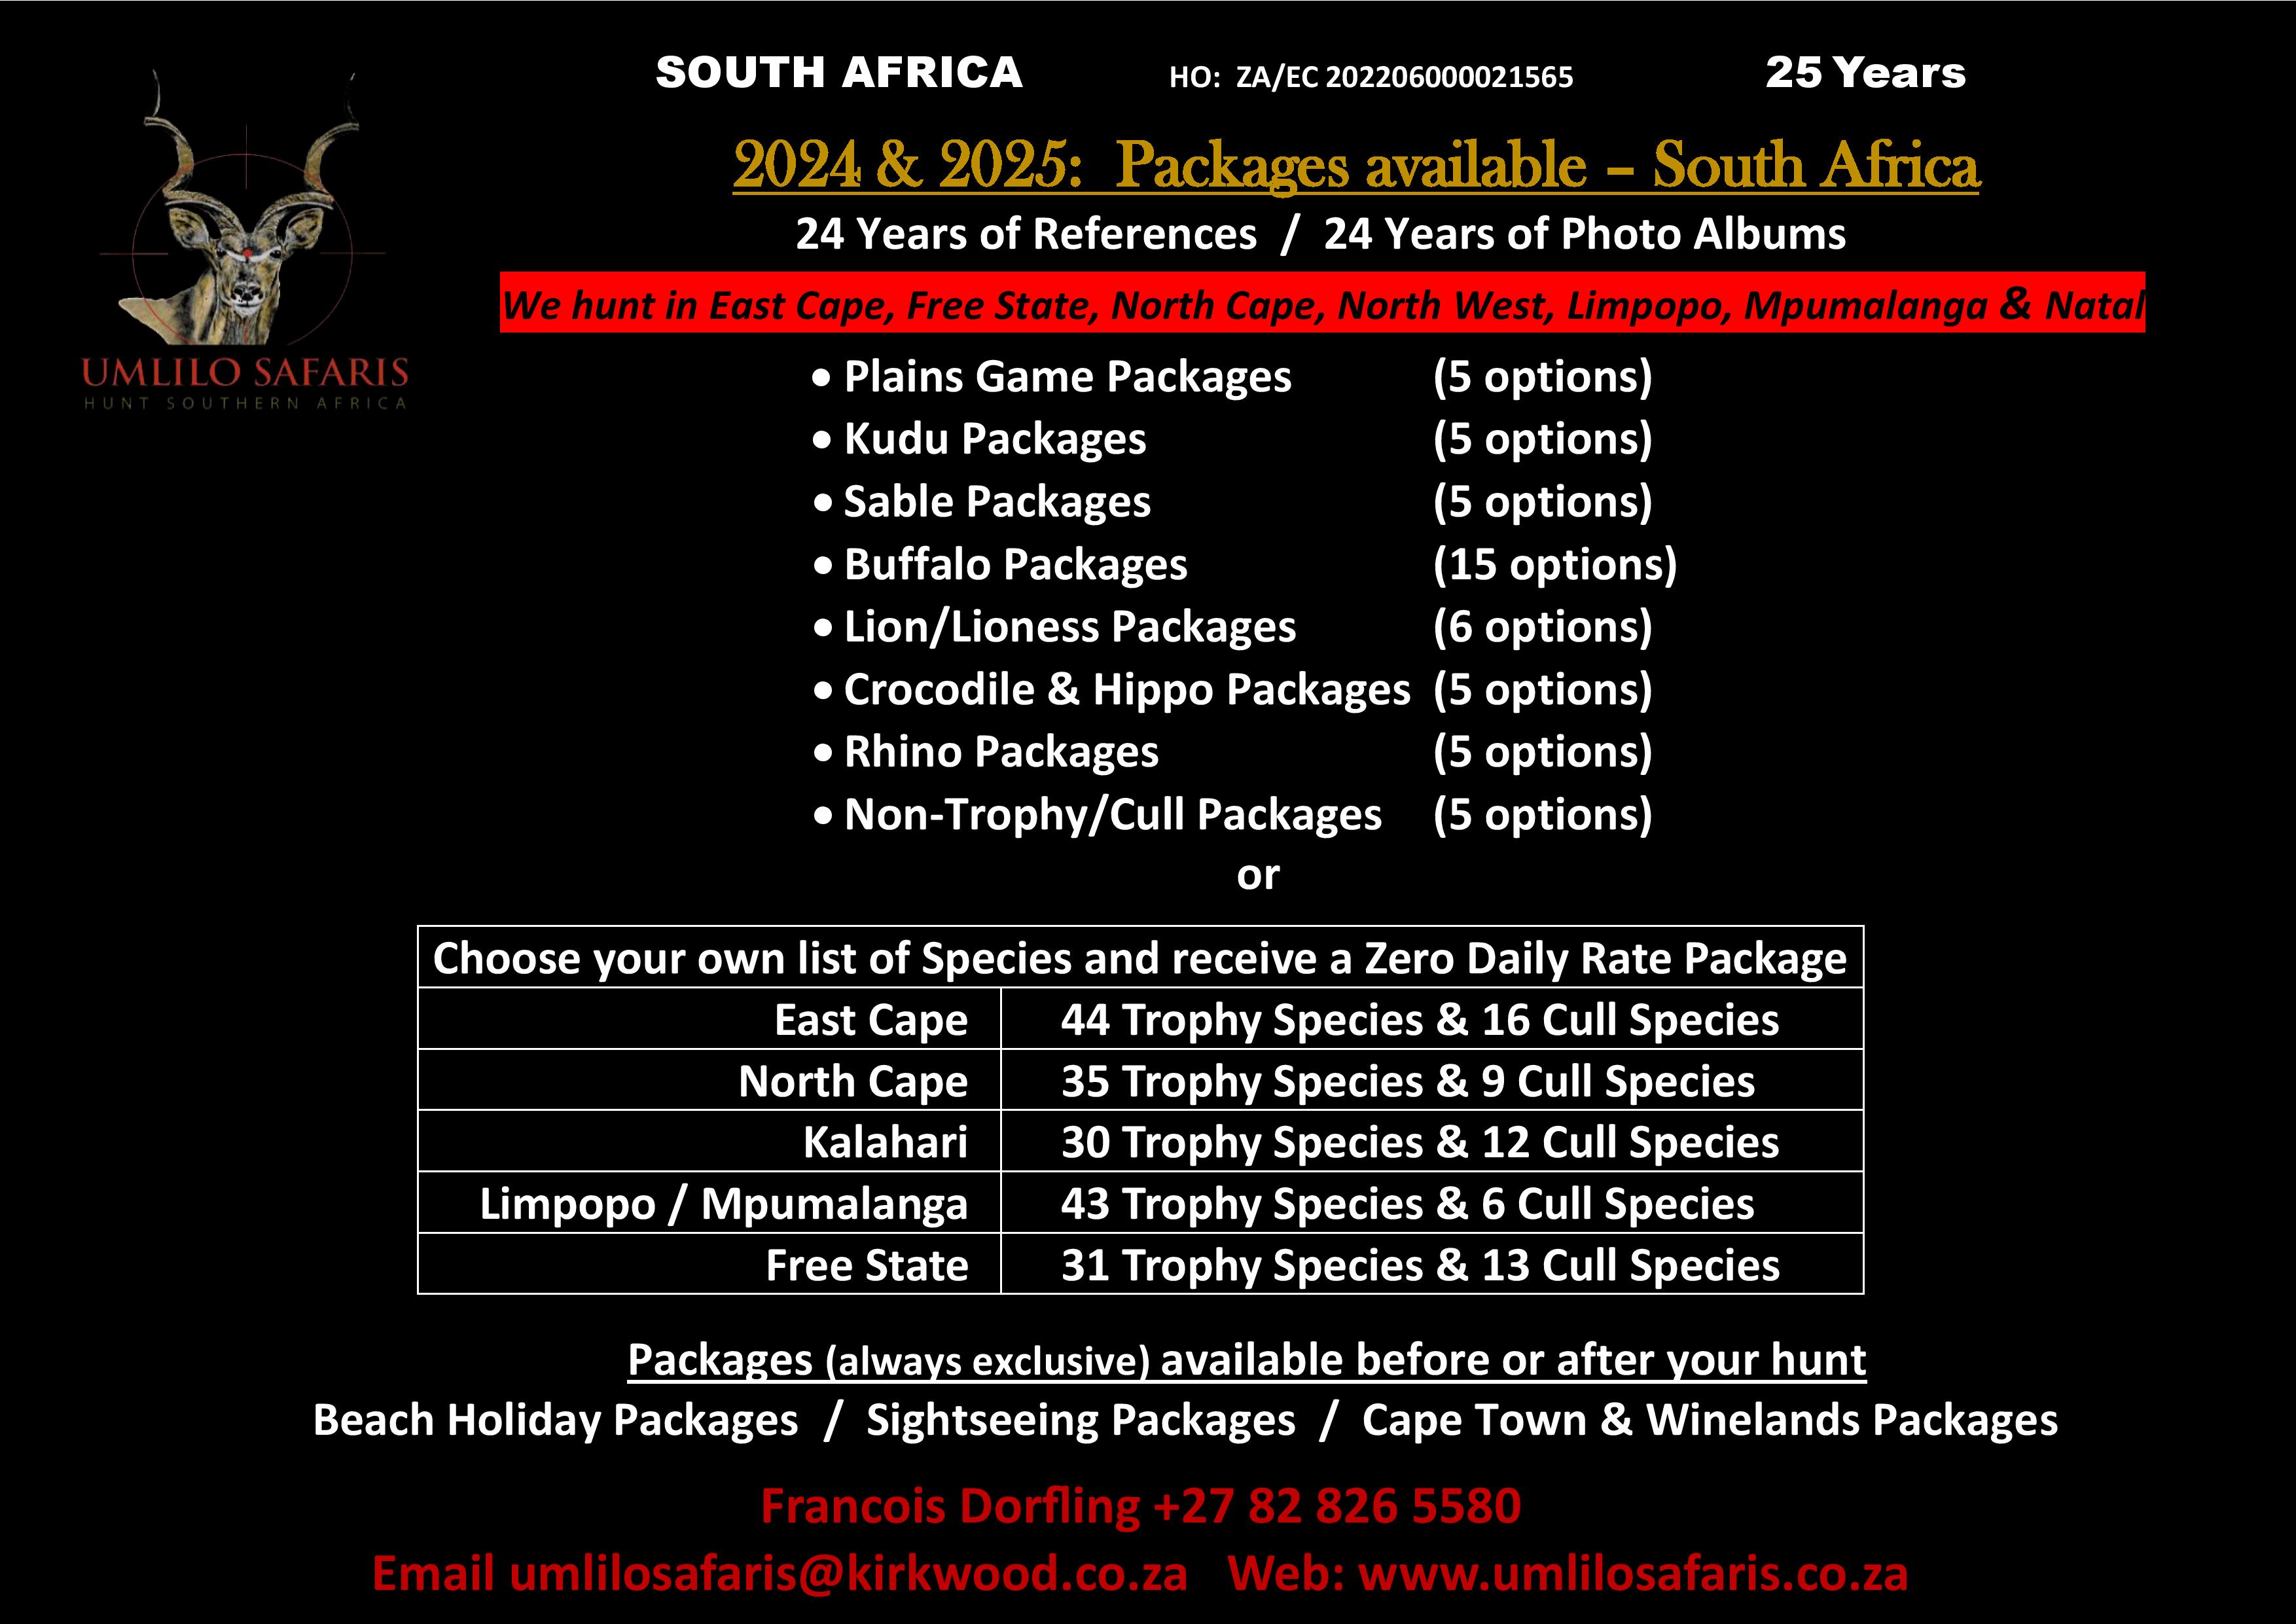 Summary of Packages 2024 & 2025 - South Africa.jpg